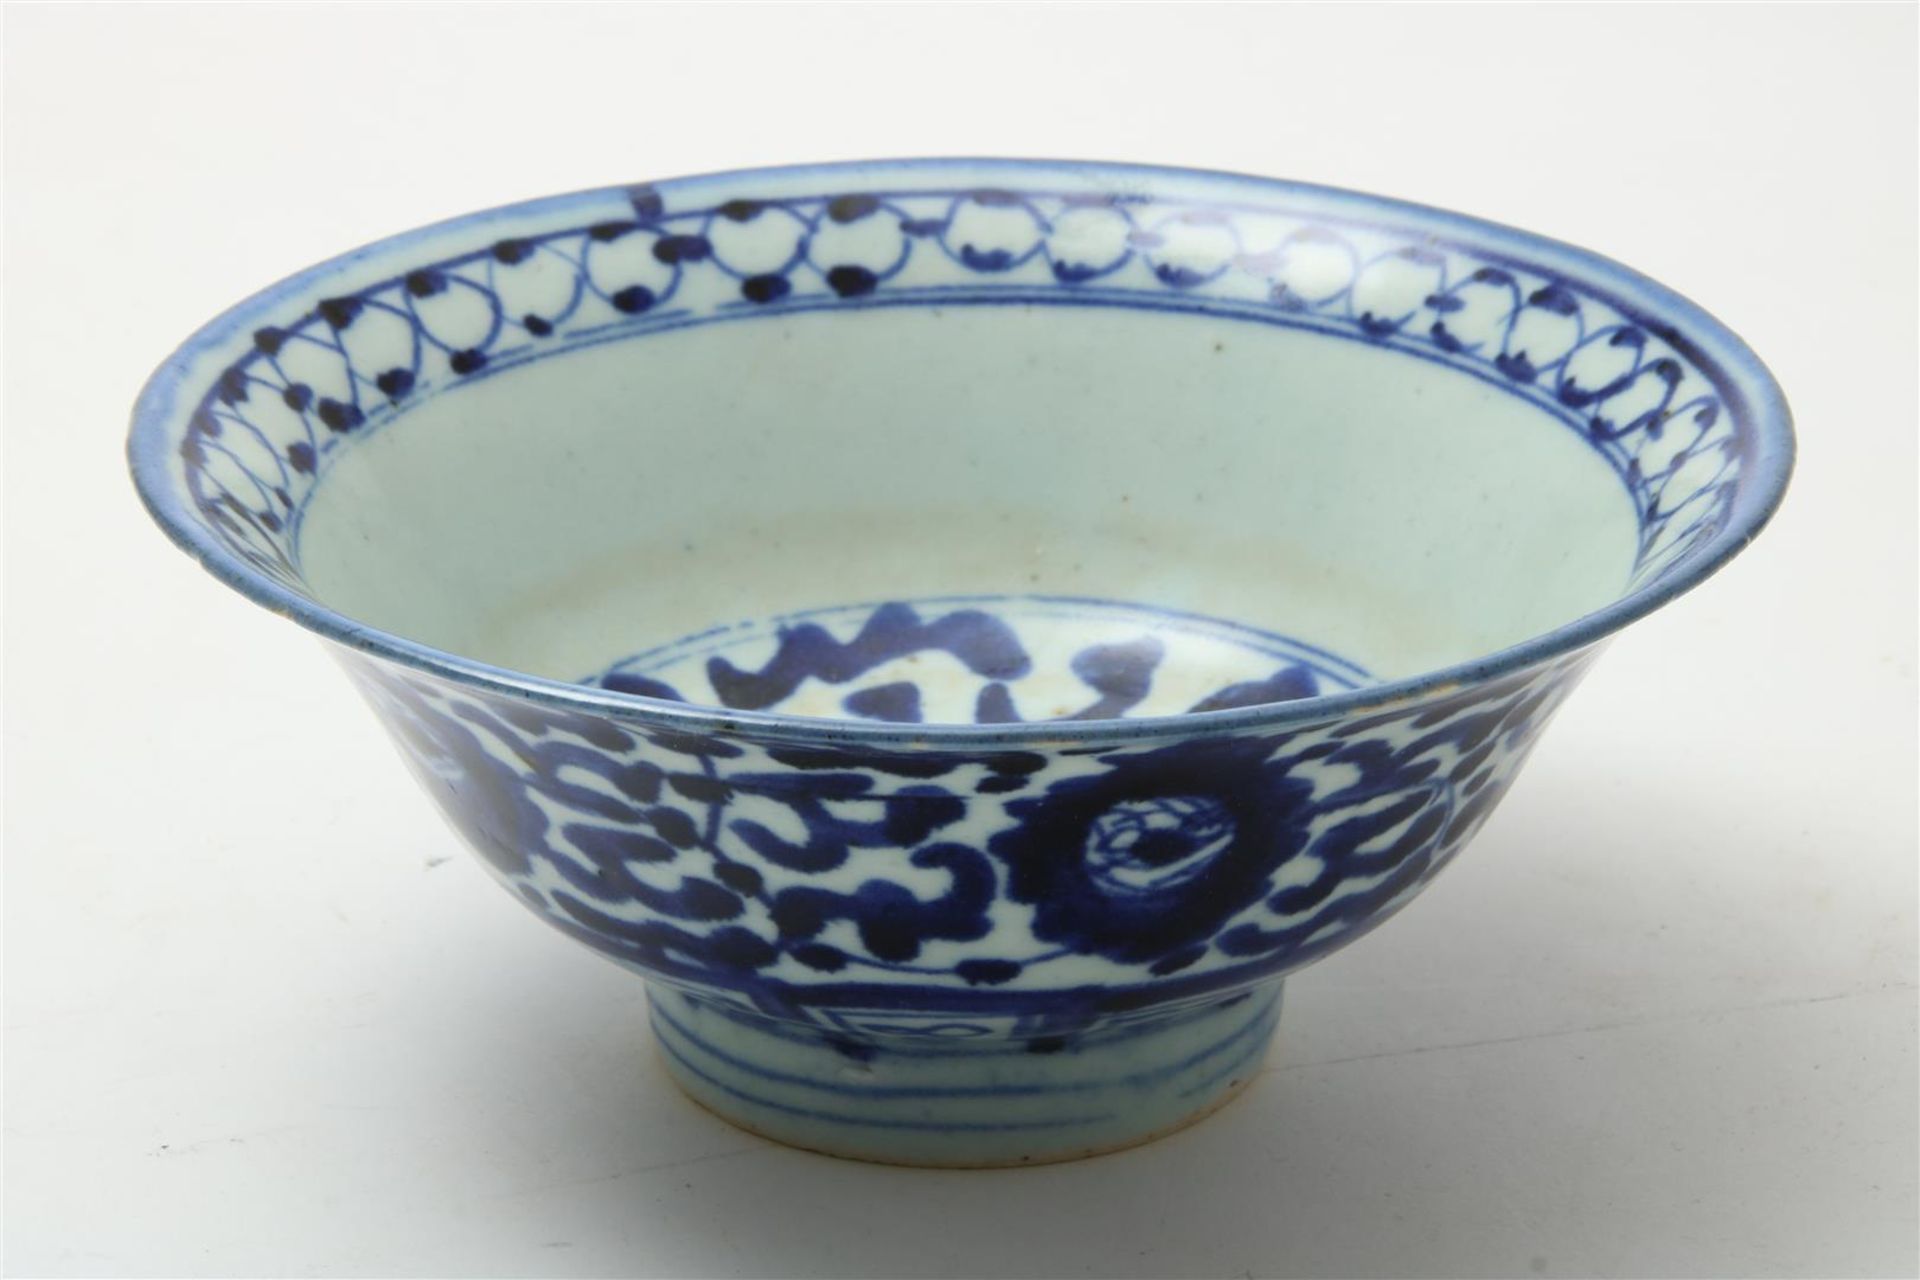 Porcelain bowl blue decorated with flowers, China 18th/19th century, marked with shopkeeper's